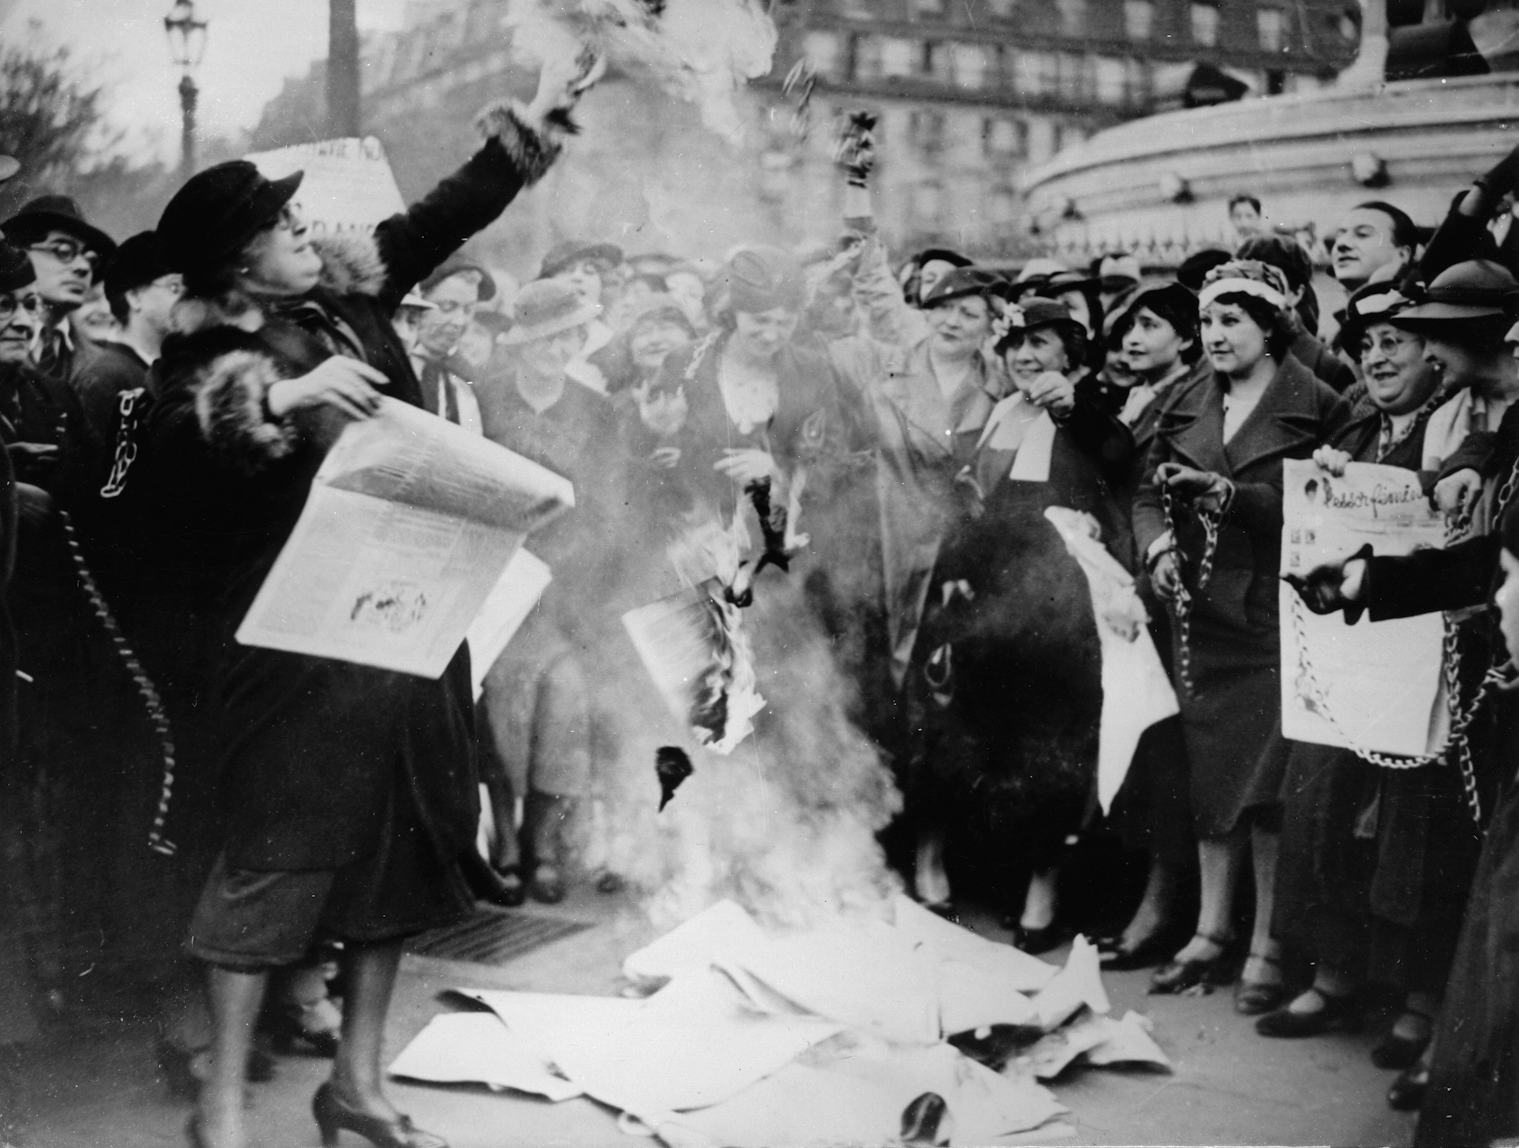 Feminist Protest Images From 1914 To Today That Will Inspire You To Stand Up To The Patriarchy